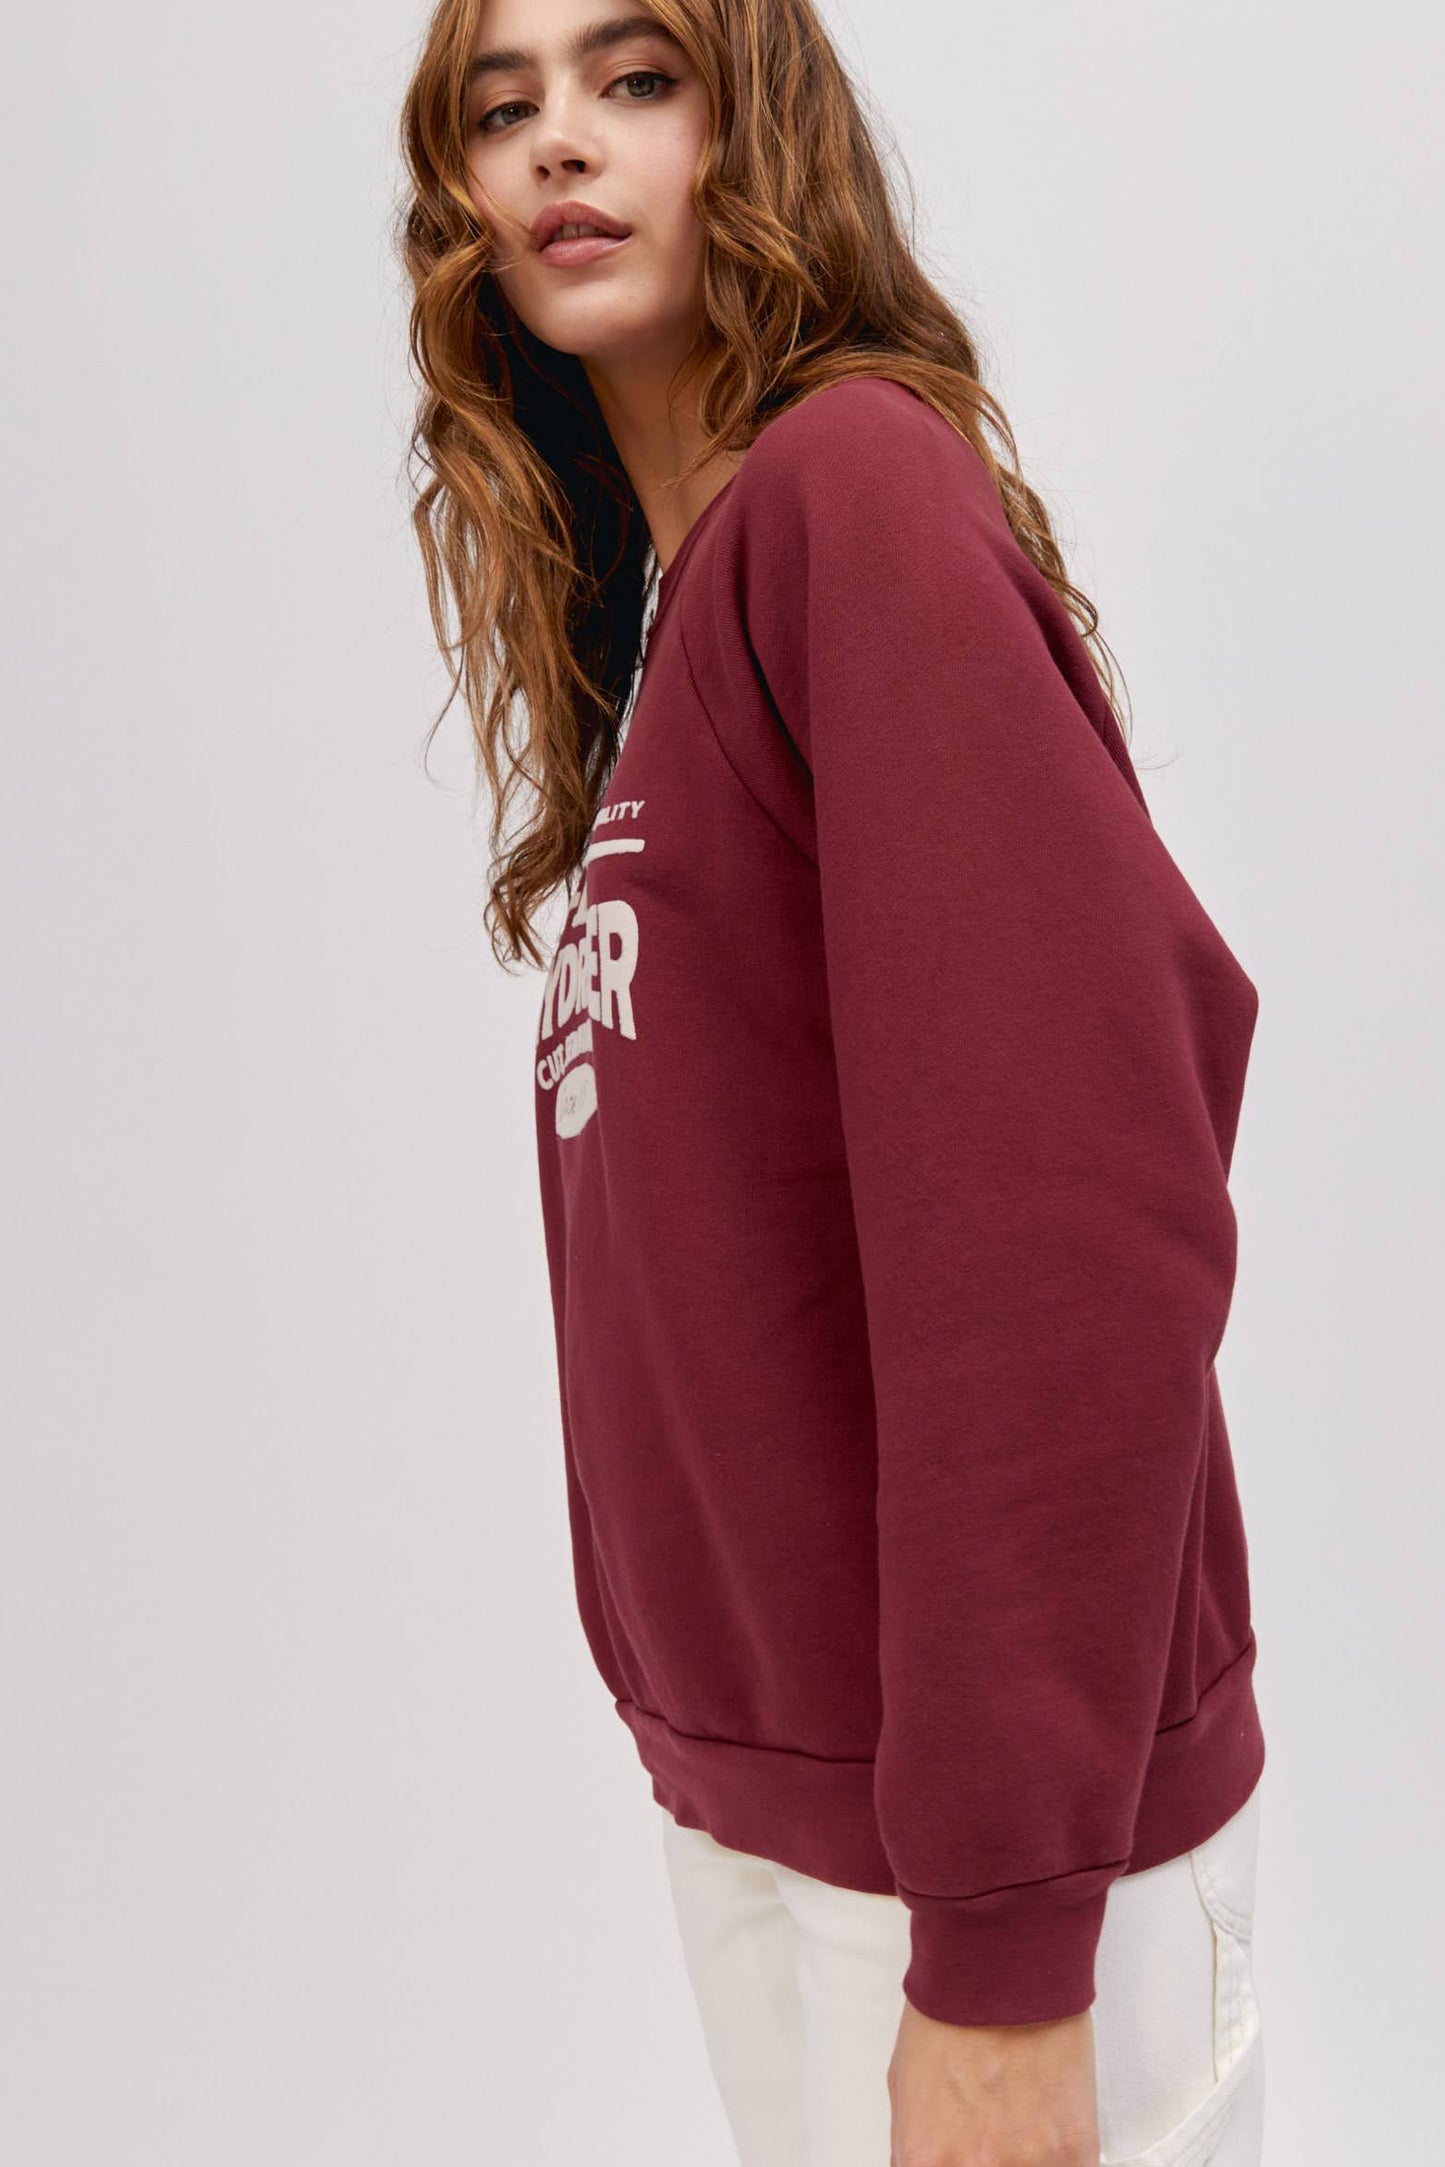 long wavy haired model posing to the side wearing maroon colored sweatshirt